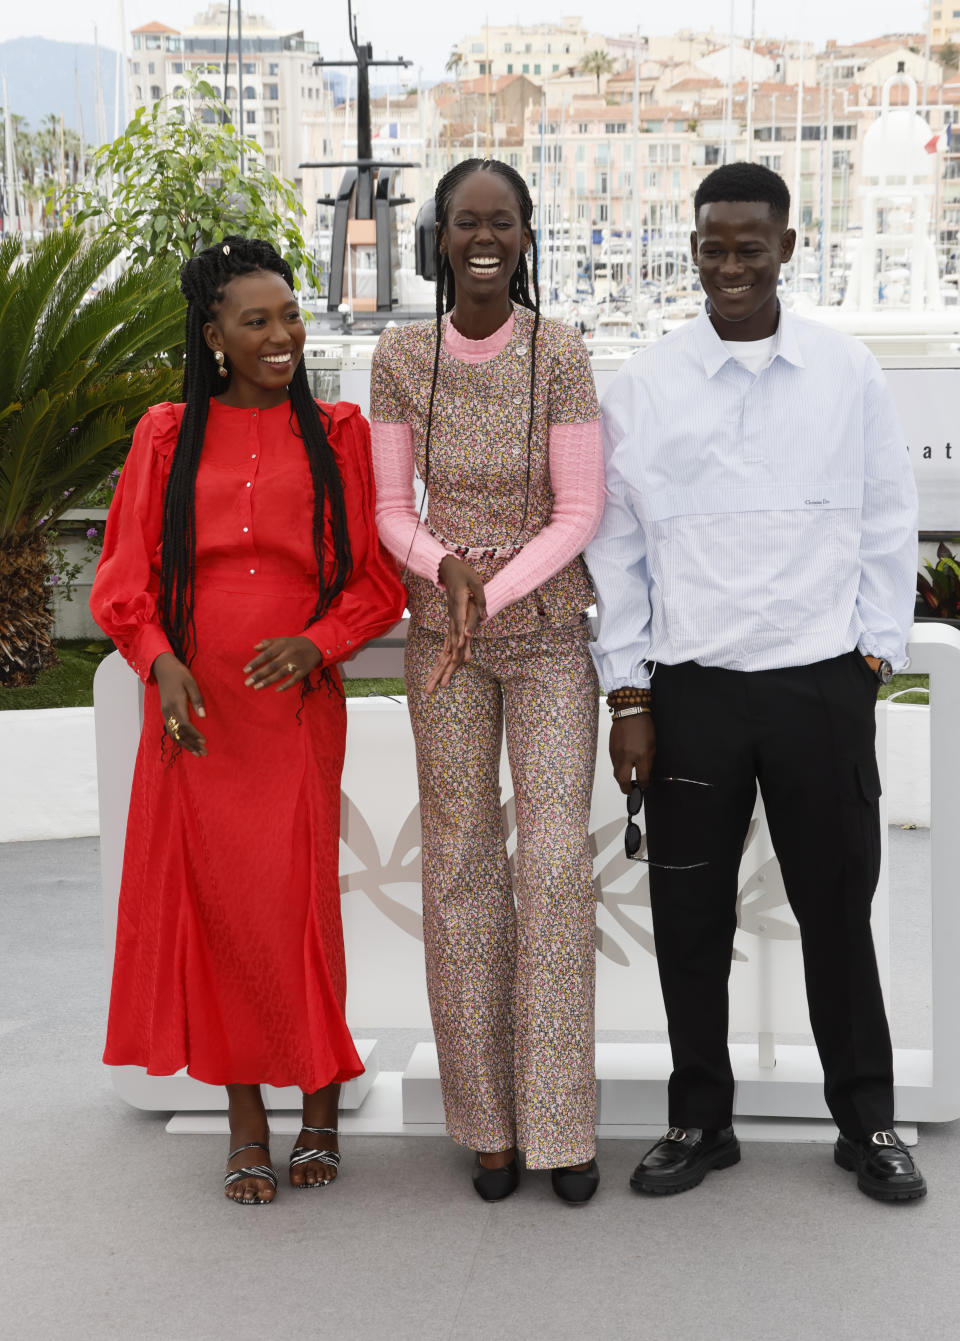 Khady Mane, from left, director Ramata-Toulaye Sy, and Mamadou Diallo pose for photographers at the photo call for the film 'Banel & Adama' at the 76th international film festival, Cannes, southern France, Sunday, May 21, 2023. (Photo by Joel C Ryan/Invision/AP)